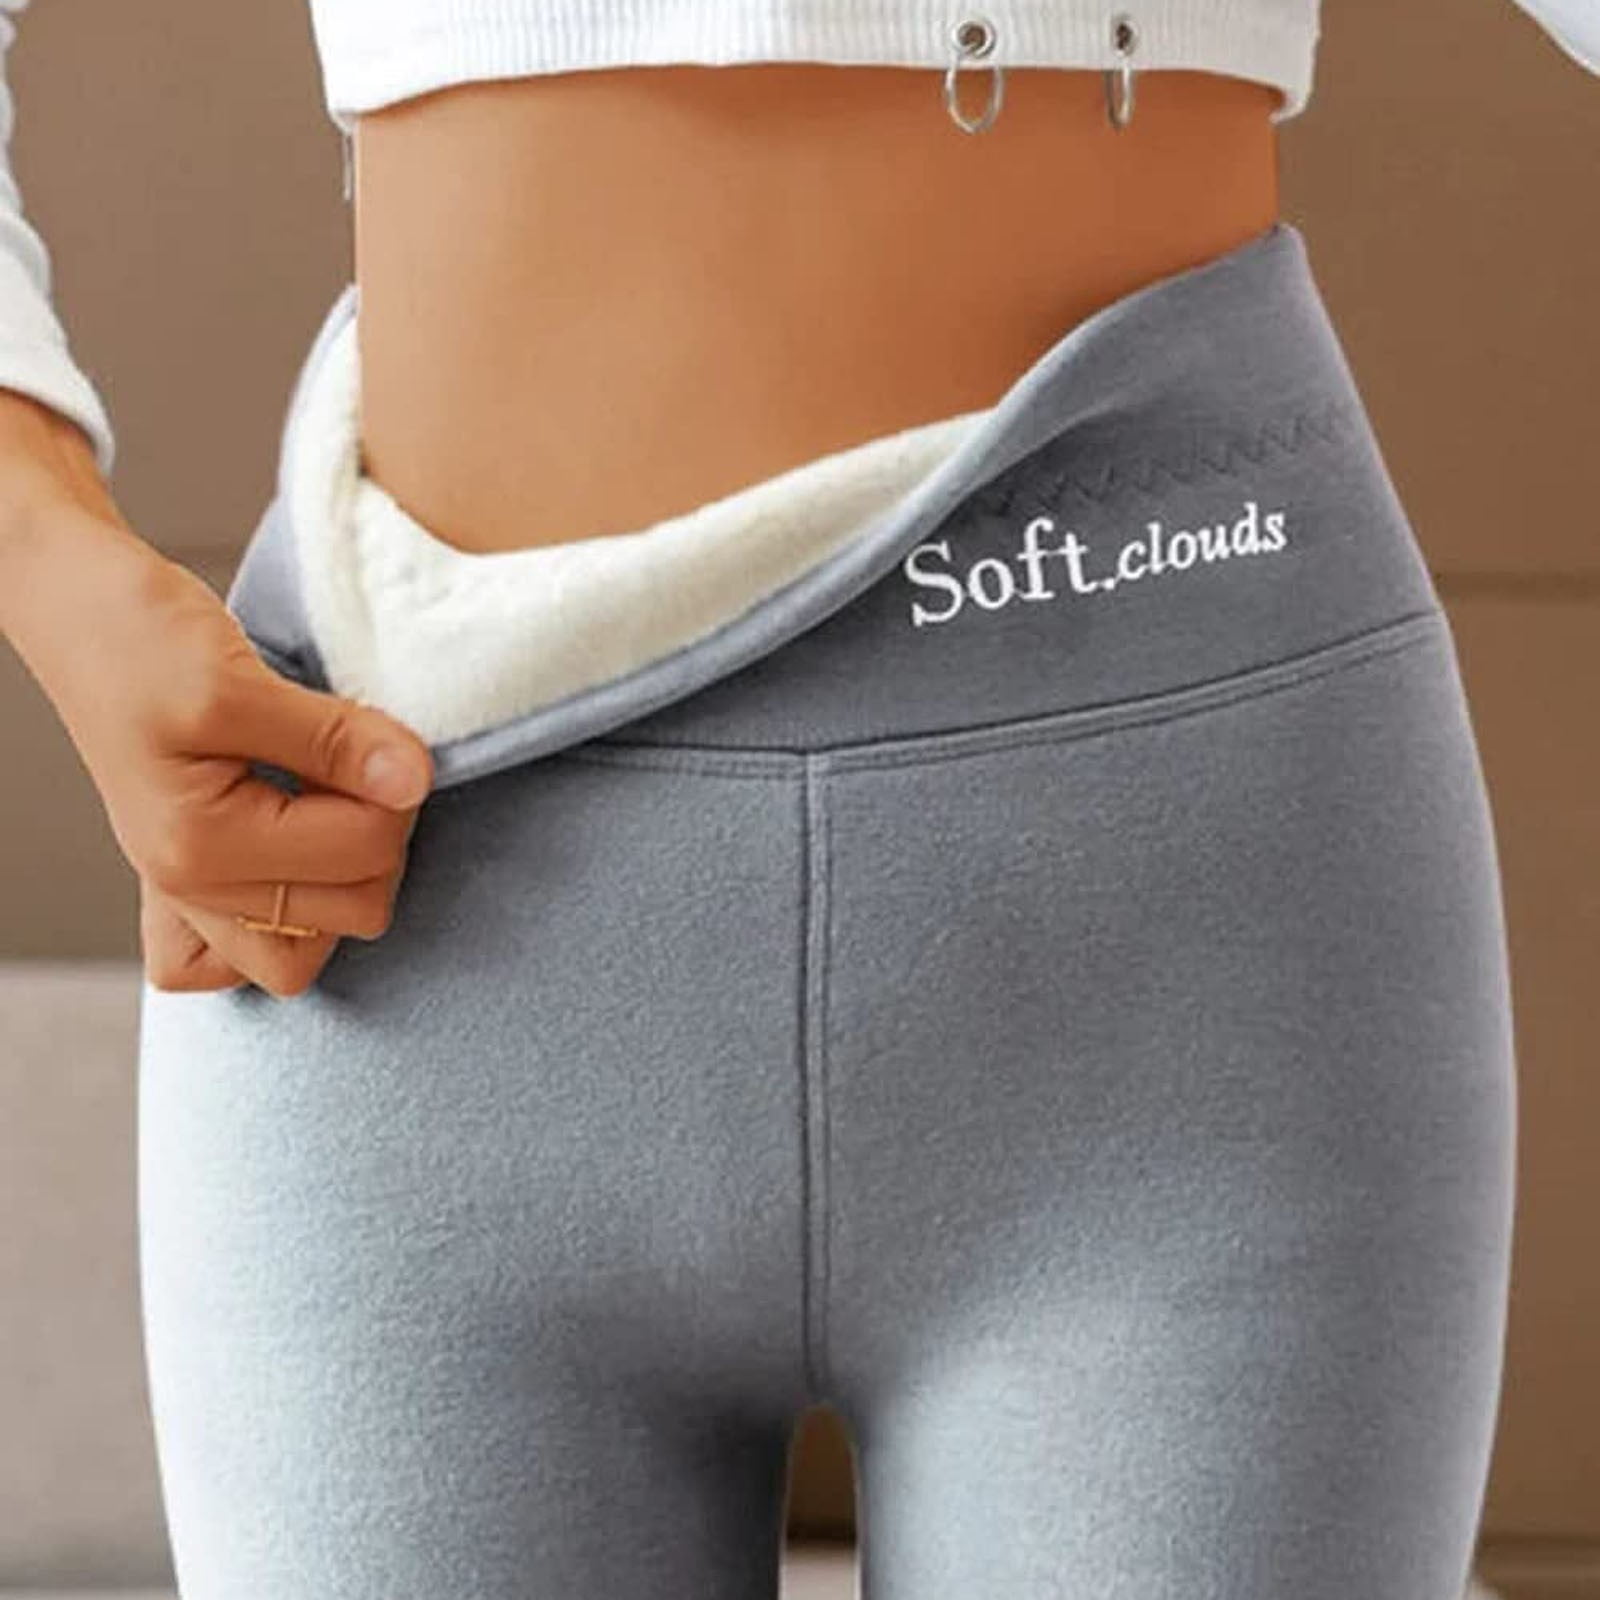 Casual Warm Winter Solid Pants,soft Clouds Fleece Leggings For